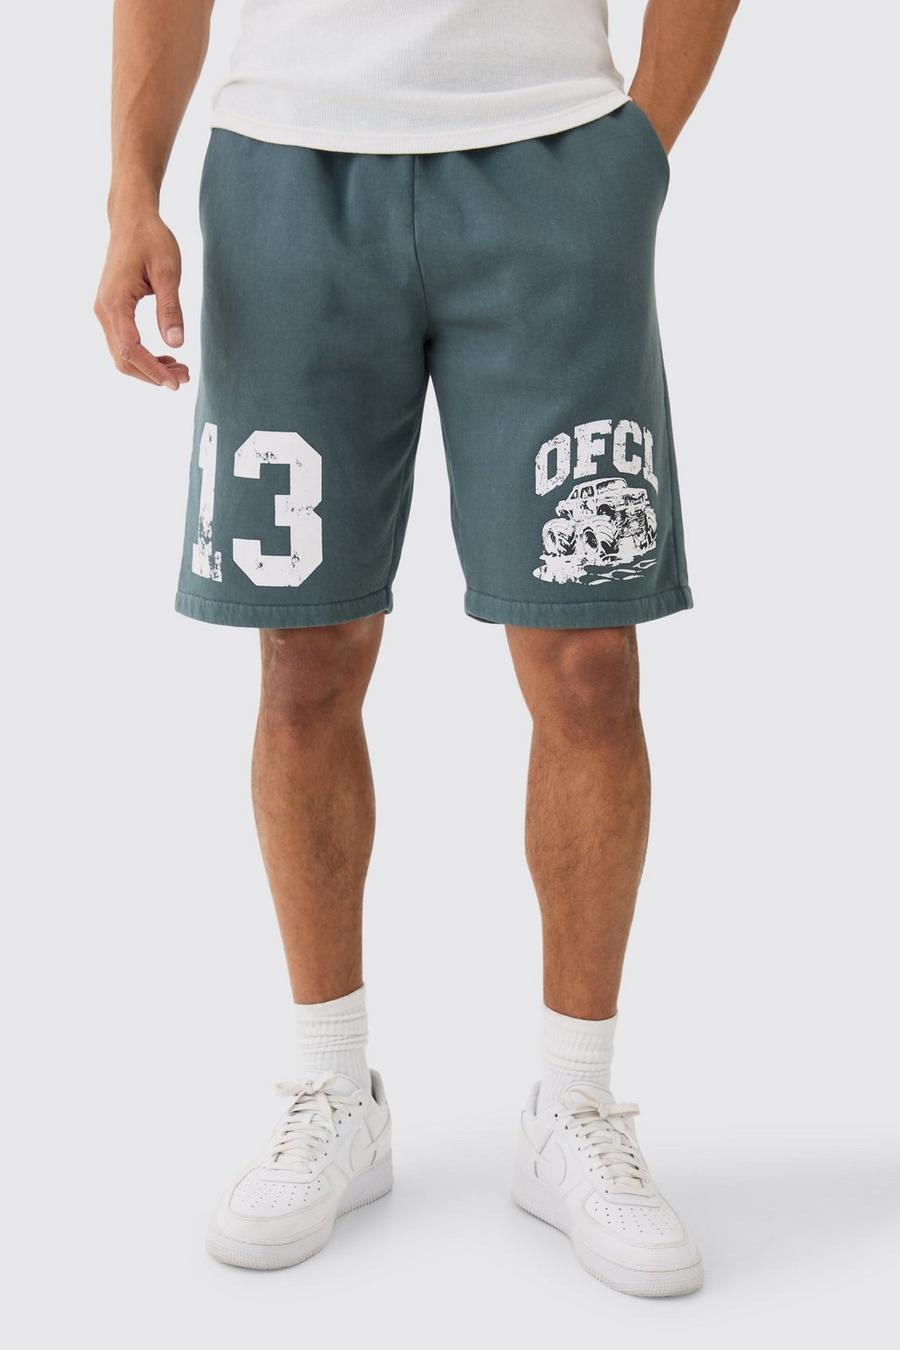 Lockere Official Shorts mit Acid-Waschung, Charcoal